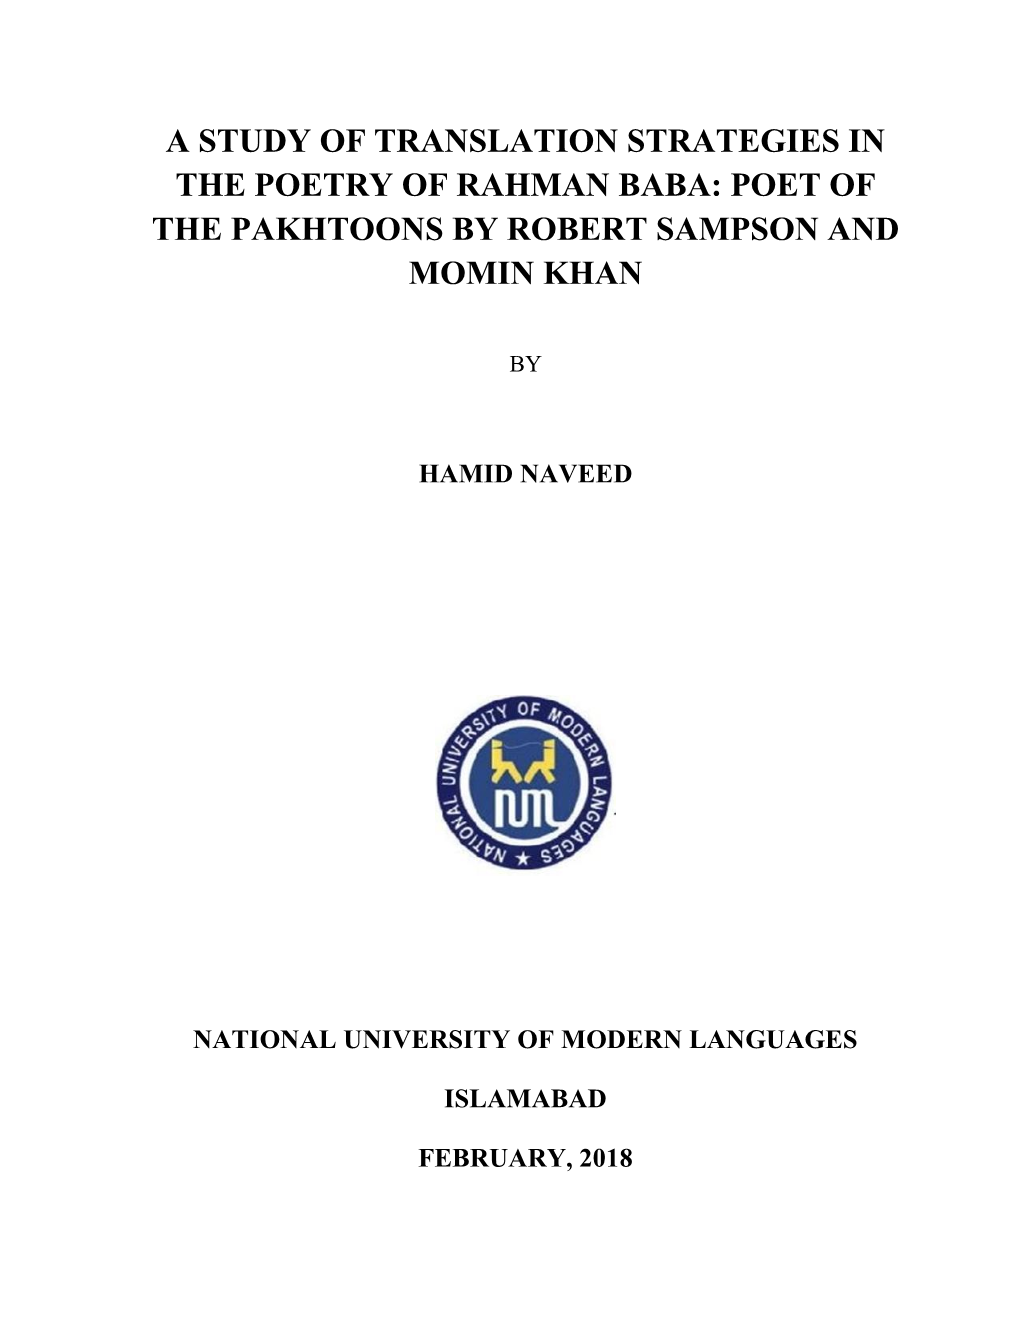 A Study of Translation Strategies in the Poetry of Rahman Baba: Poet of the Pakhtoons by Robert Sampson and Momin Khan